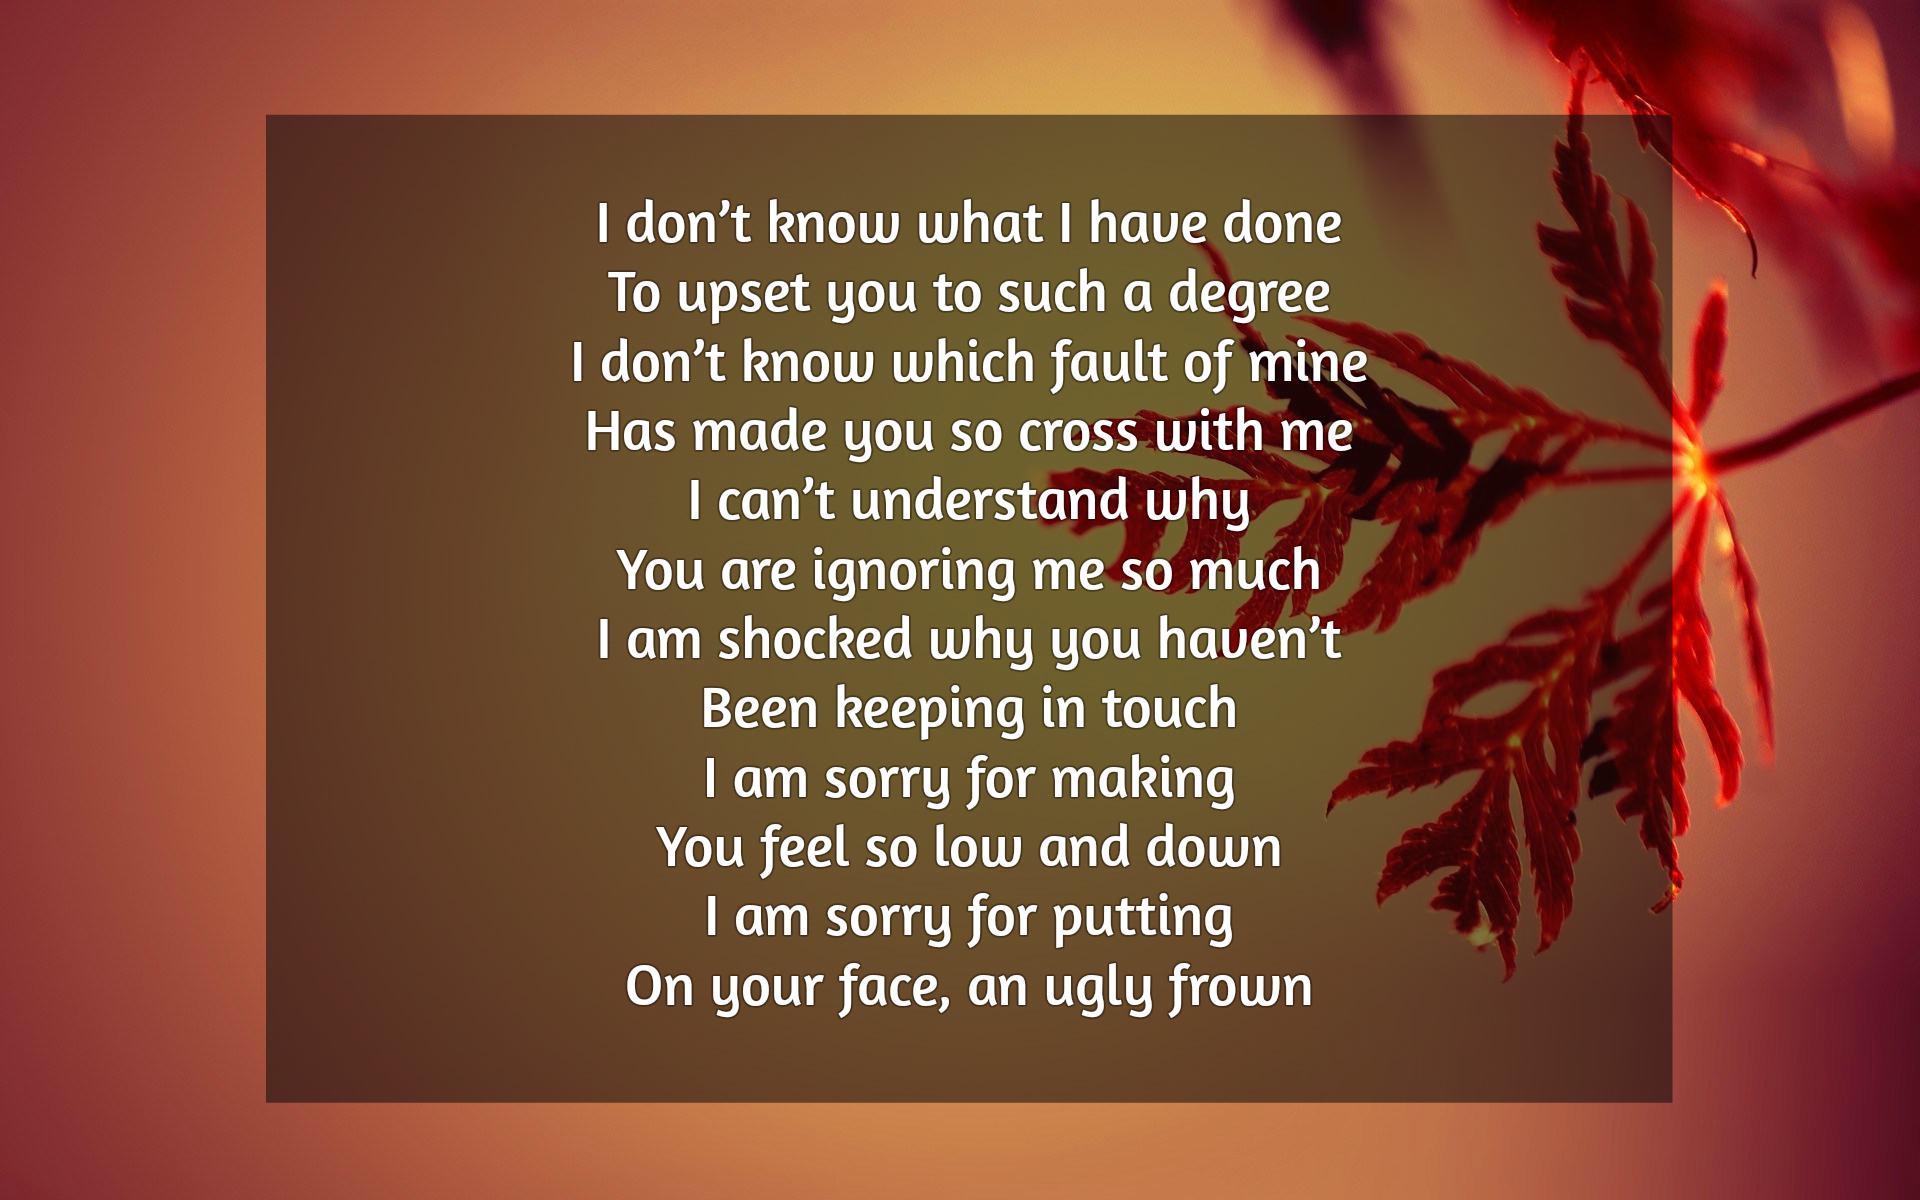 Poems will you forgive me Poem :